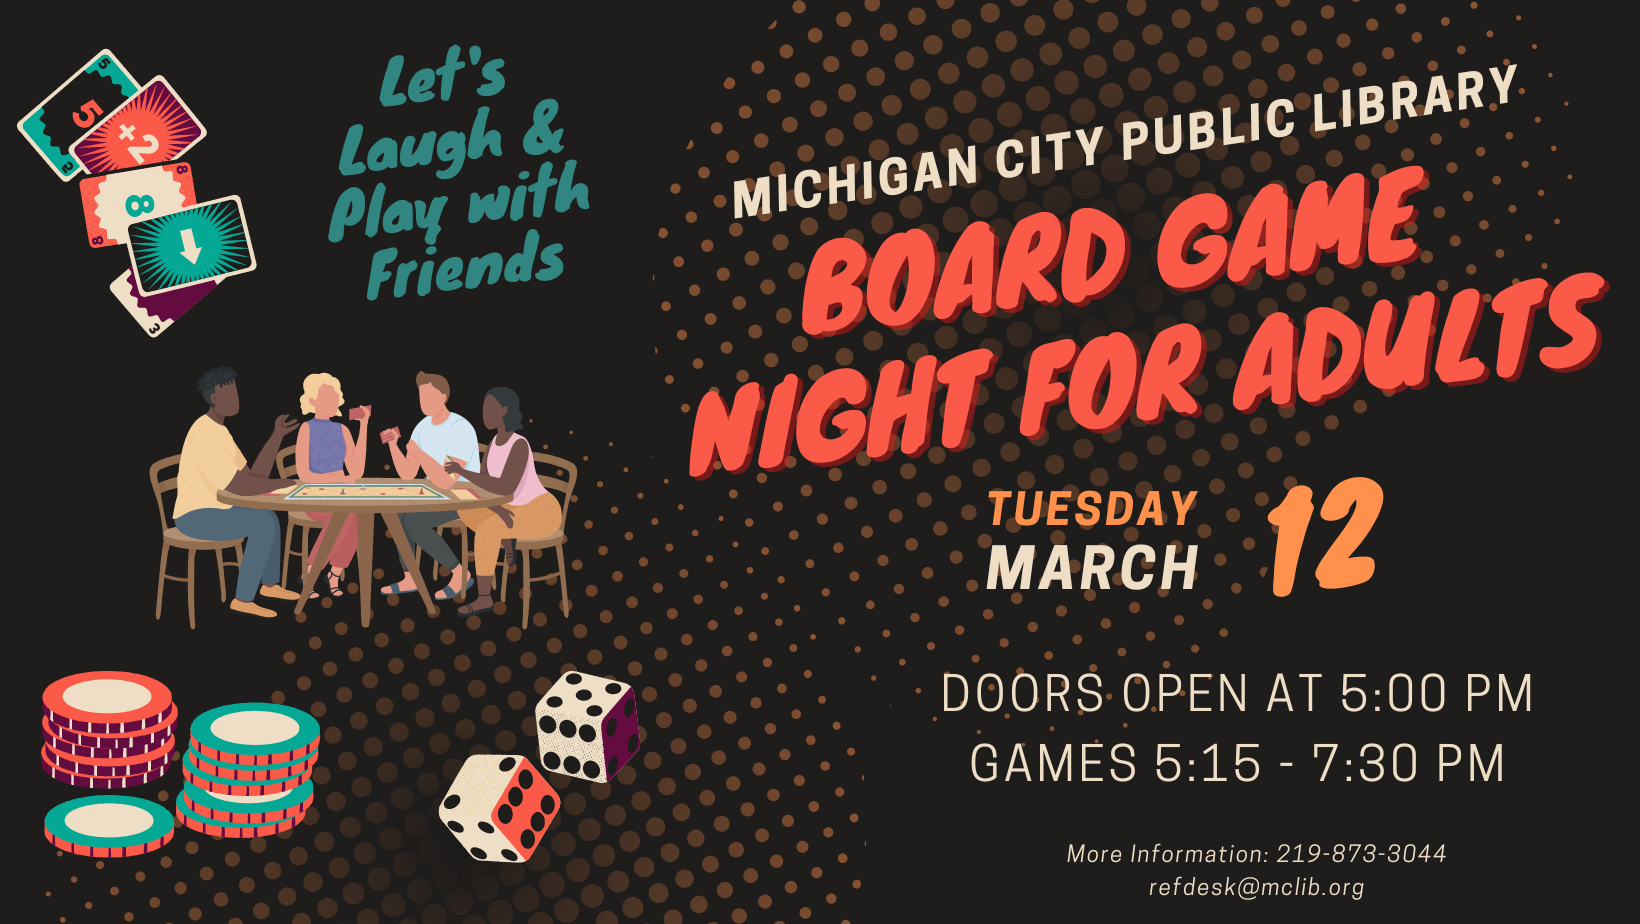 Board Game Night for Adults, Tuesday, March 12 beginning at 5:00 pm